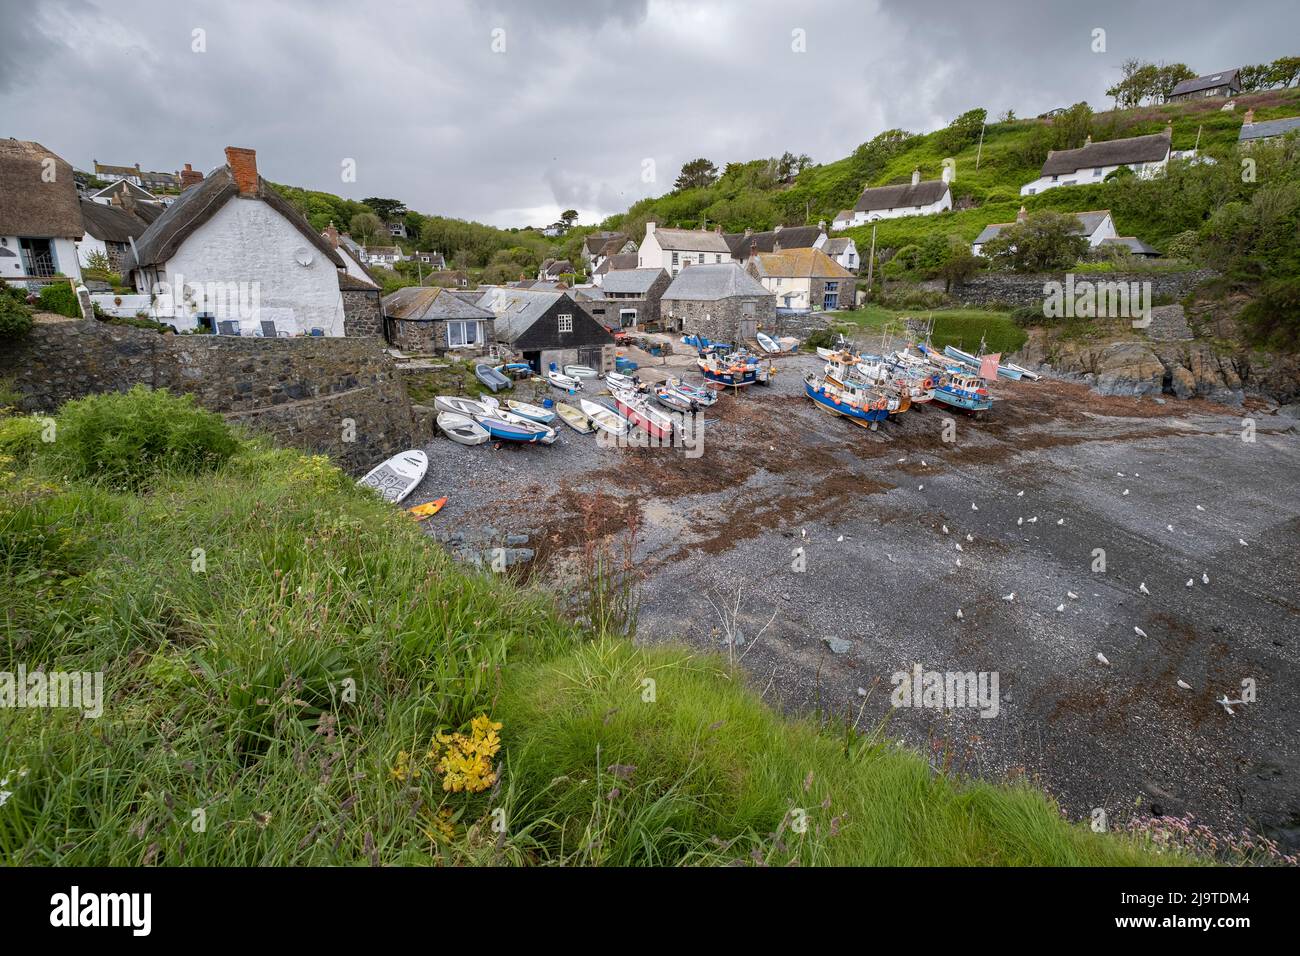 The picturesque fishing village of Cadgwith in Cornwall, ENgland with rows of boats moored in the harbour. Stock Photo